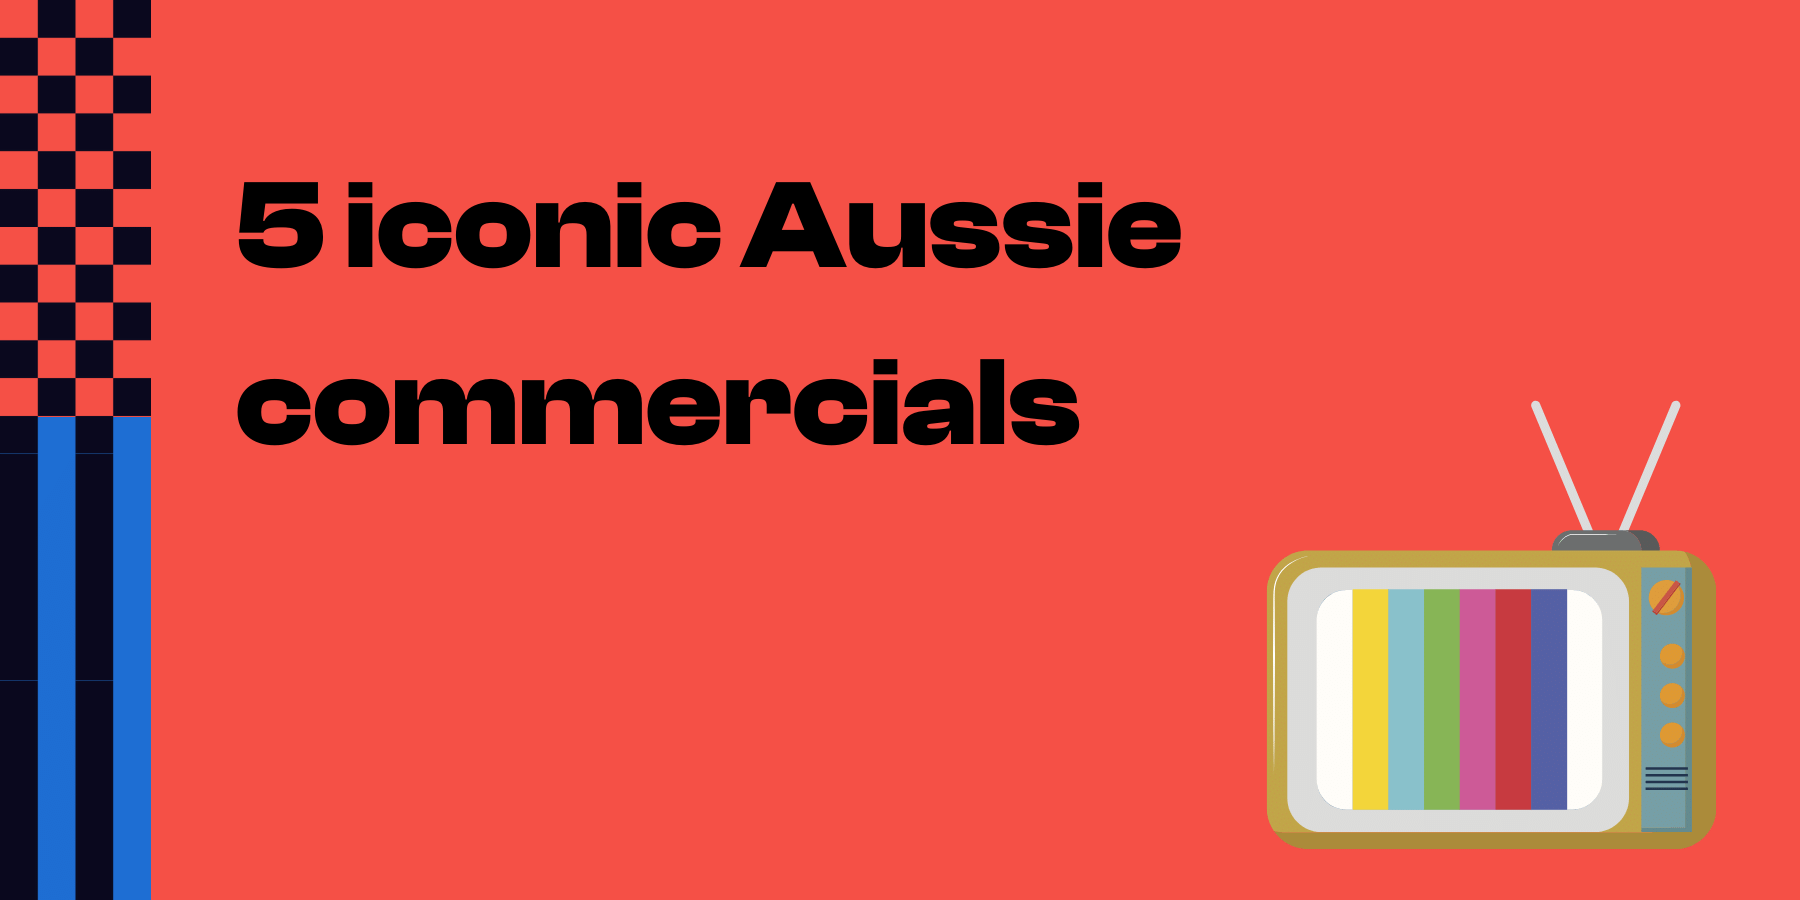 The Aussiest Brand Ever